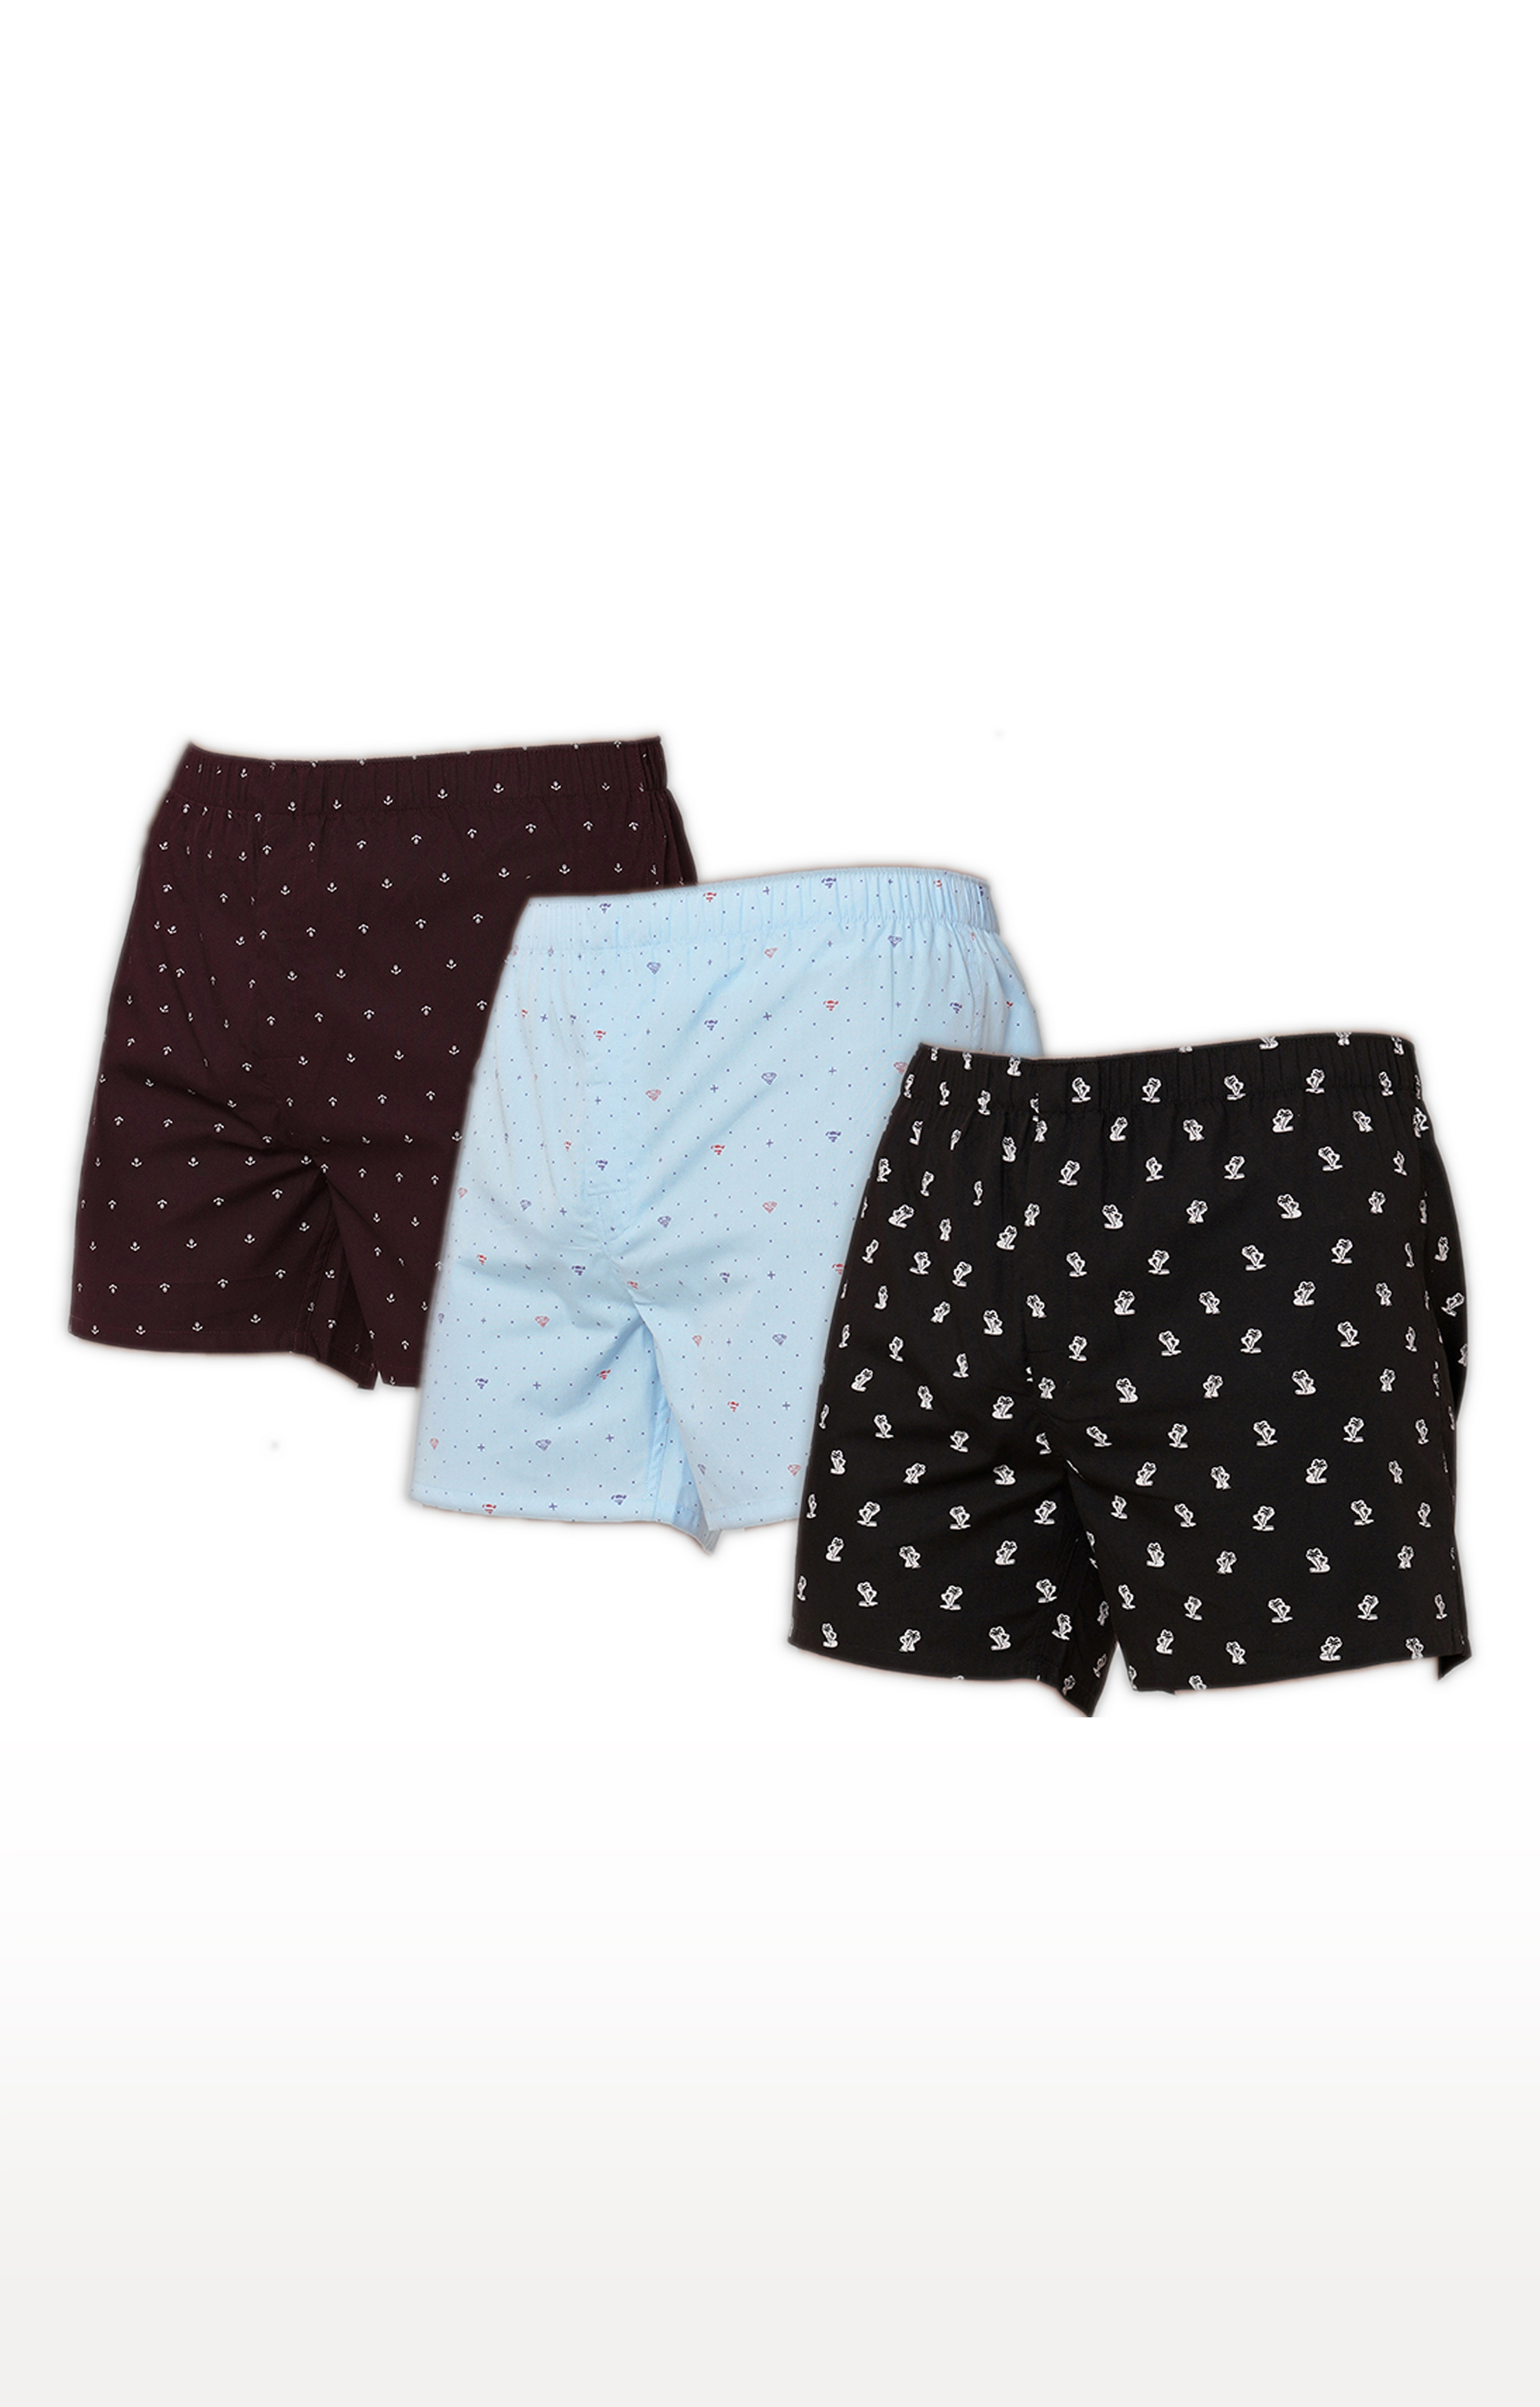 FITZ | Fitz Cotton Regular Fit Printed Boxer Shorts For Men - Pack of 3